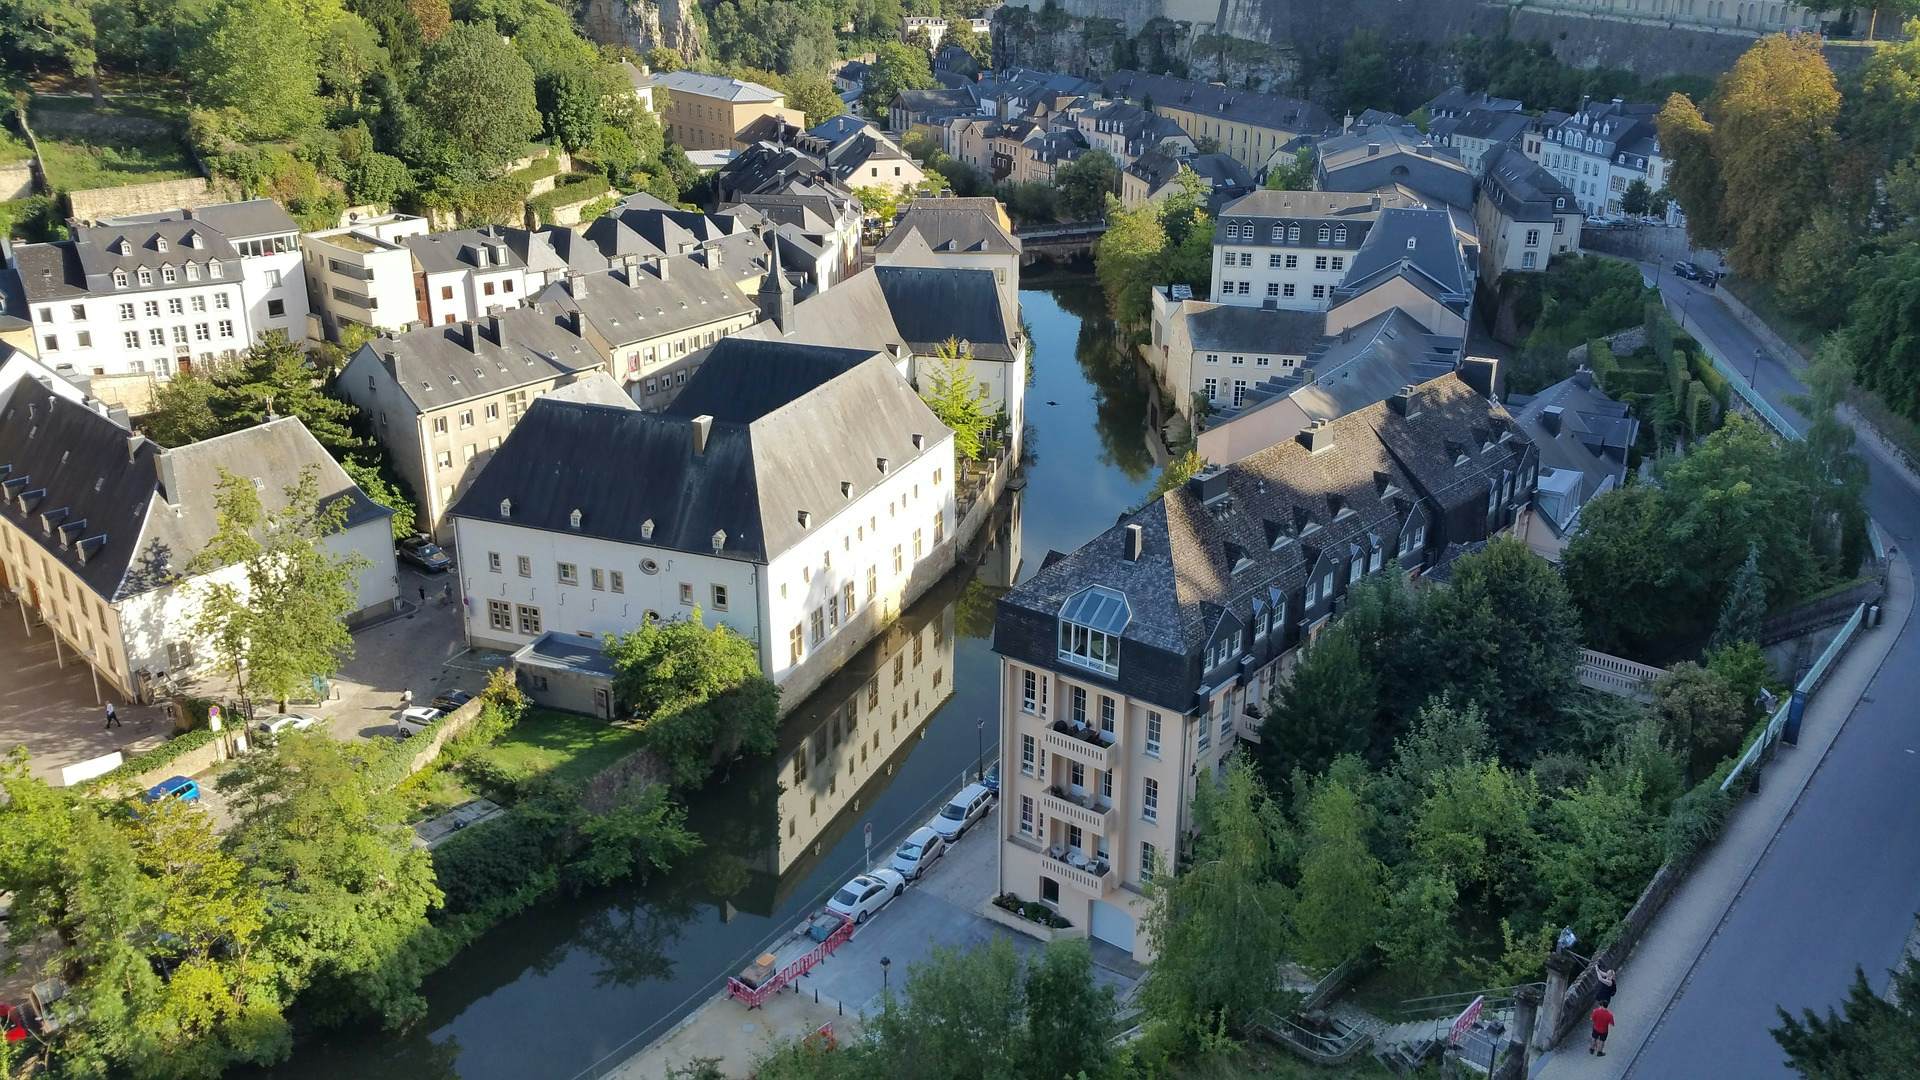 Luxembourg image